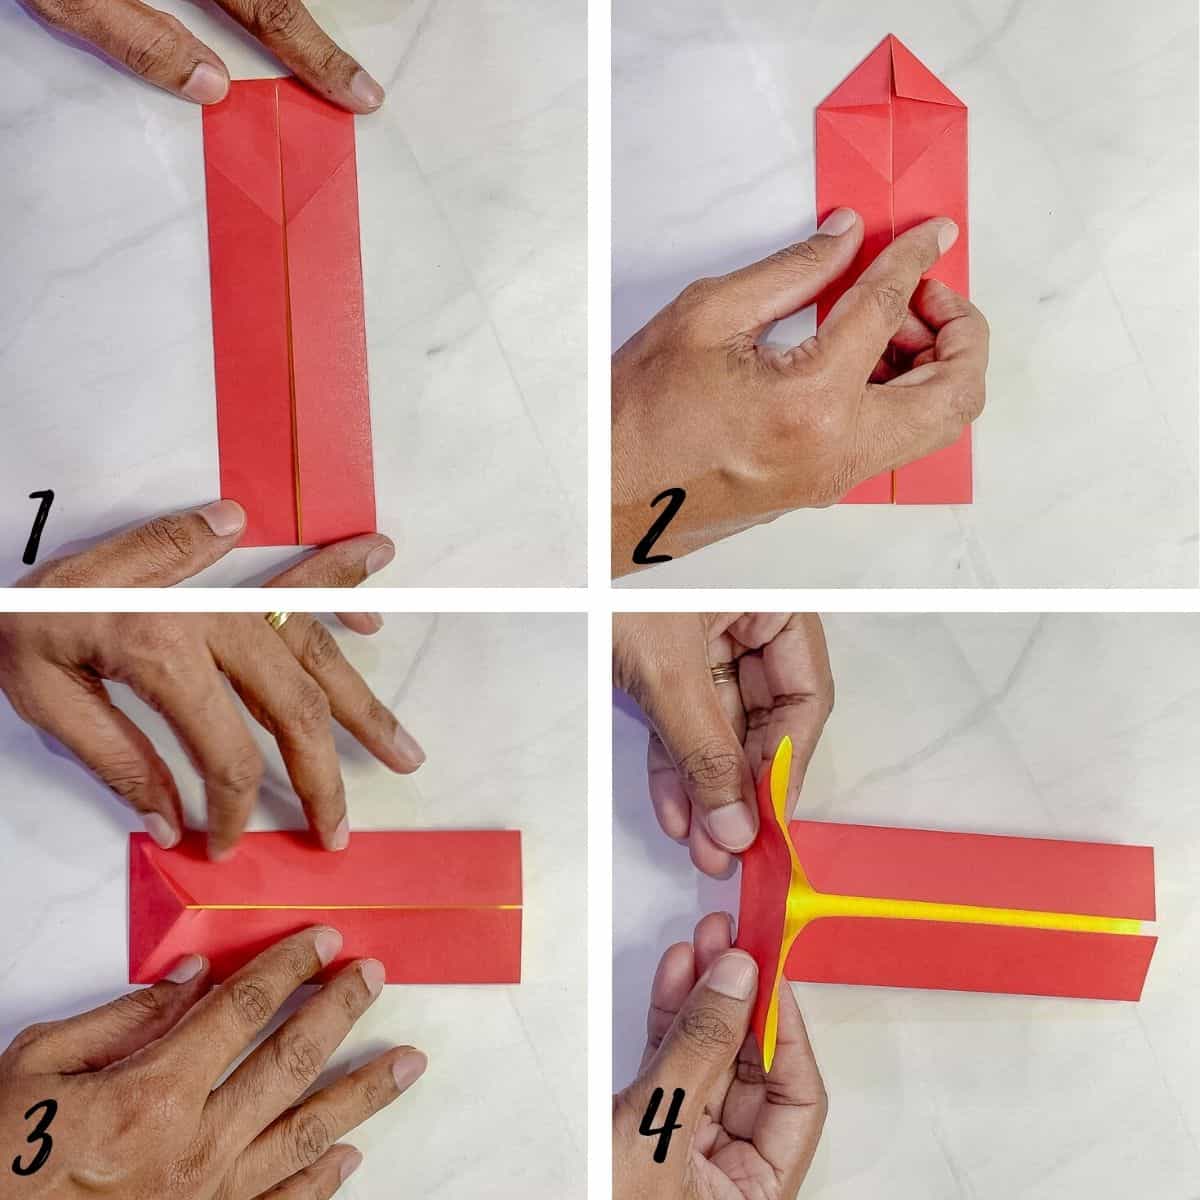 A poster of 4 images showing how to fold a red paper.